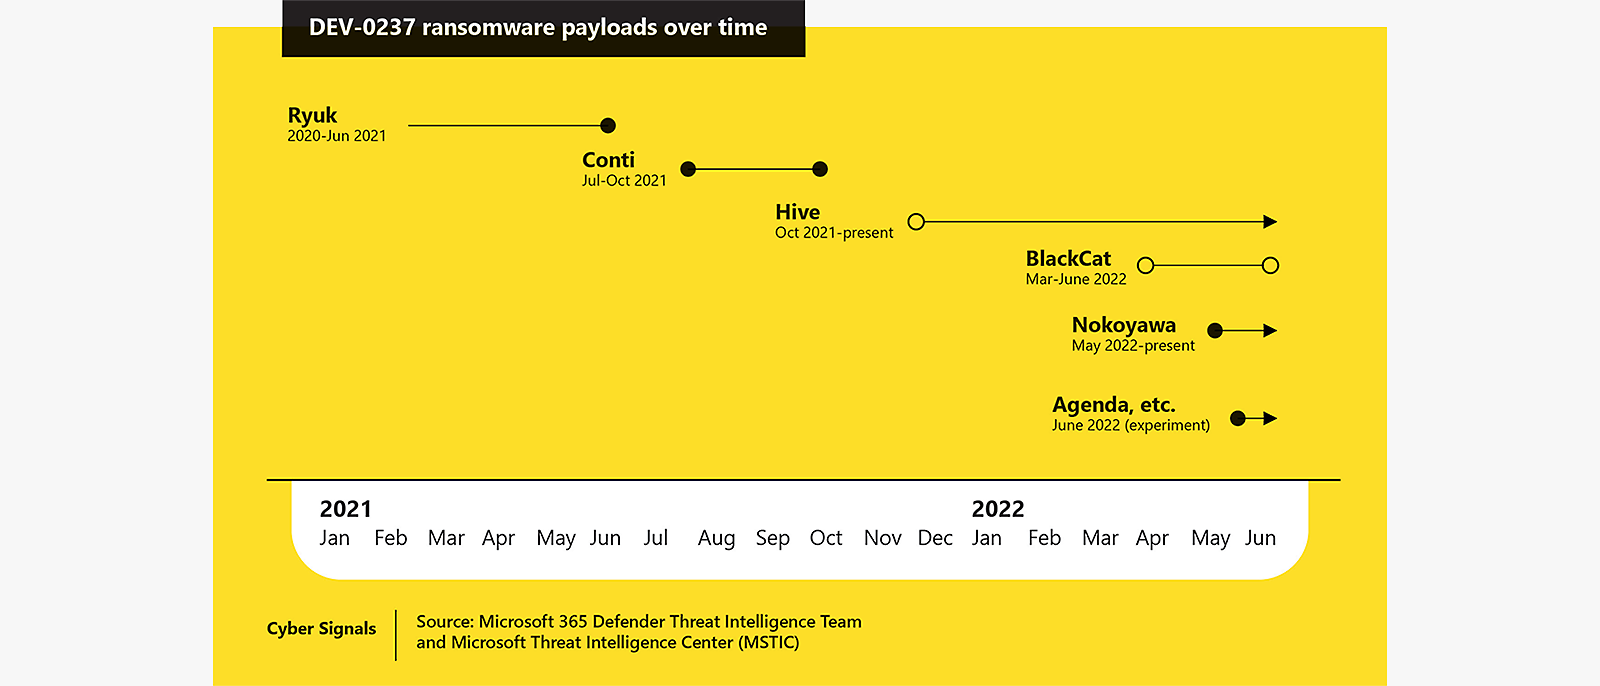 Chart showing DEV-0237 ransomware payloads over time (2021-2022)